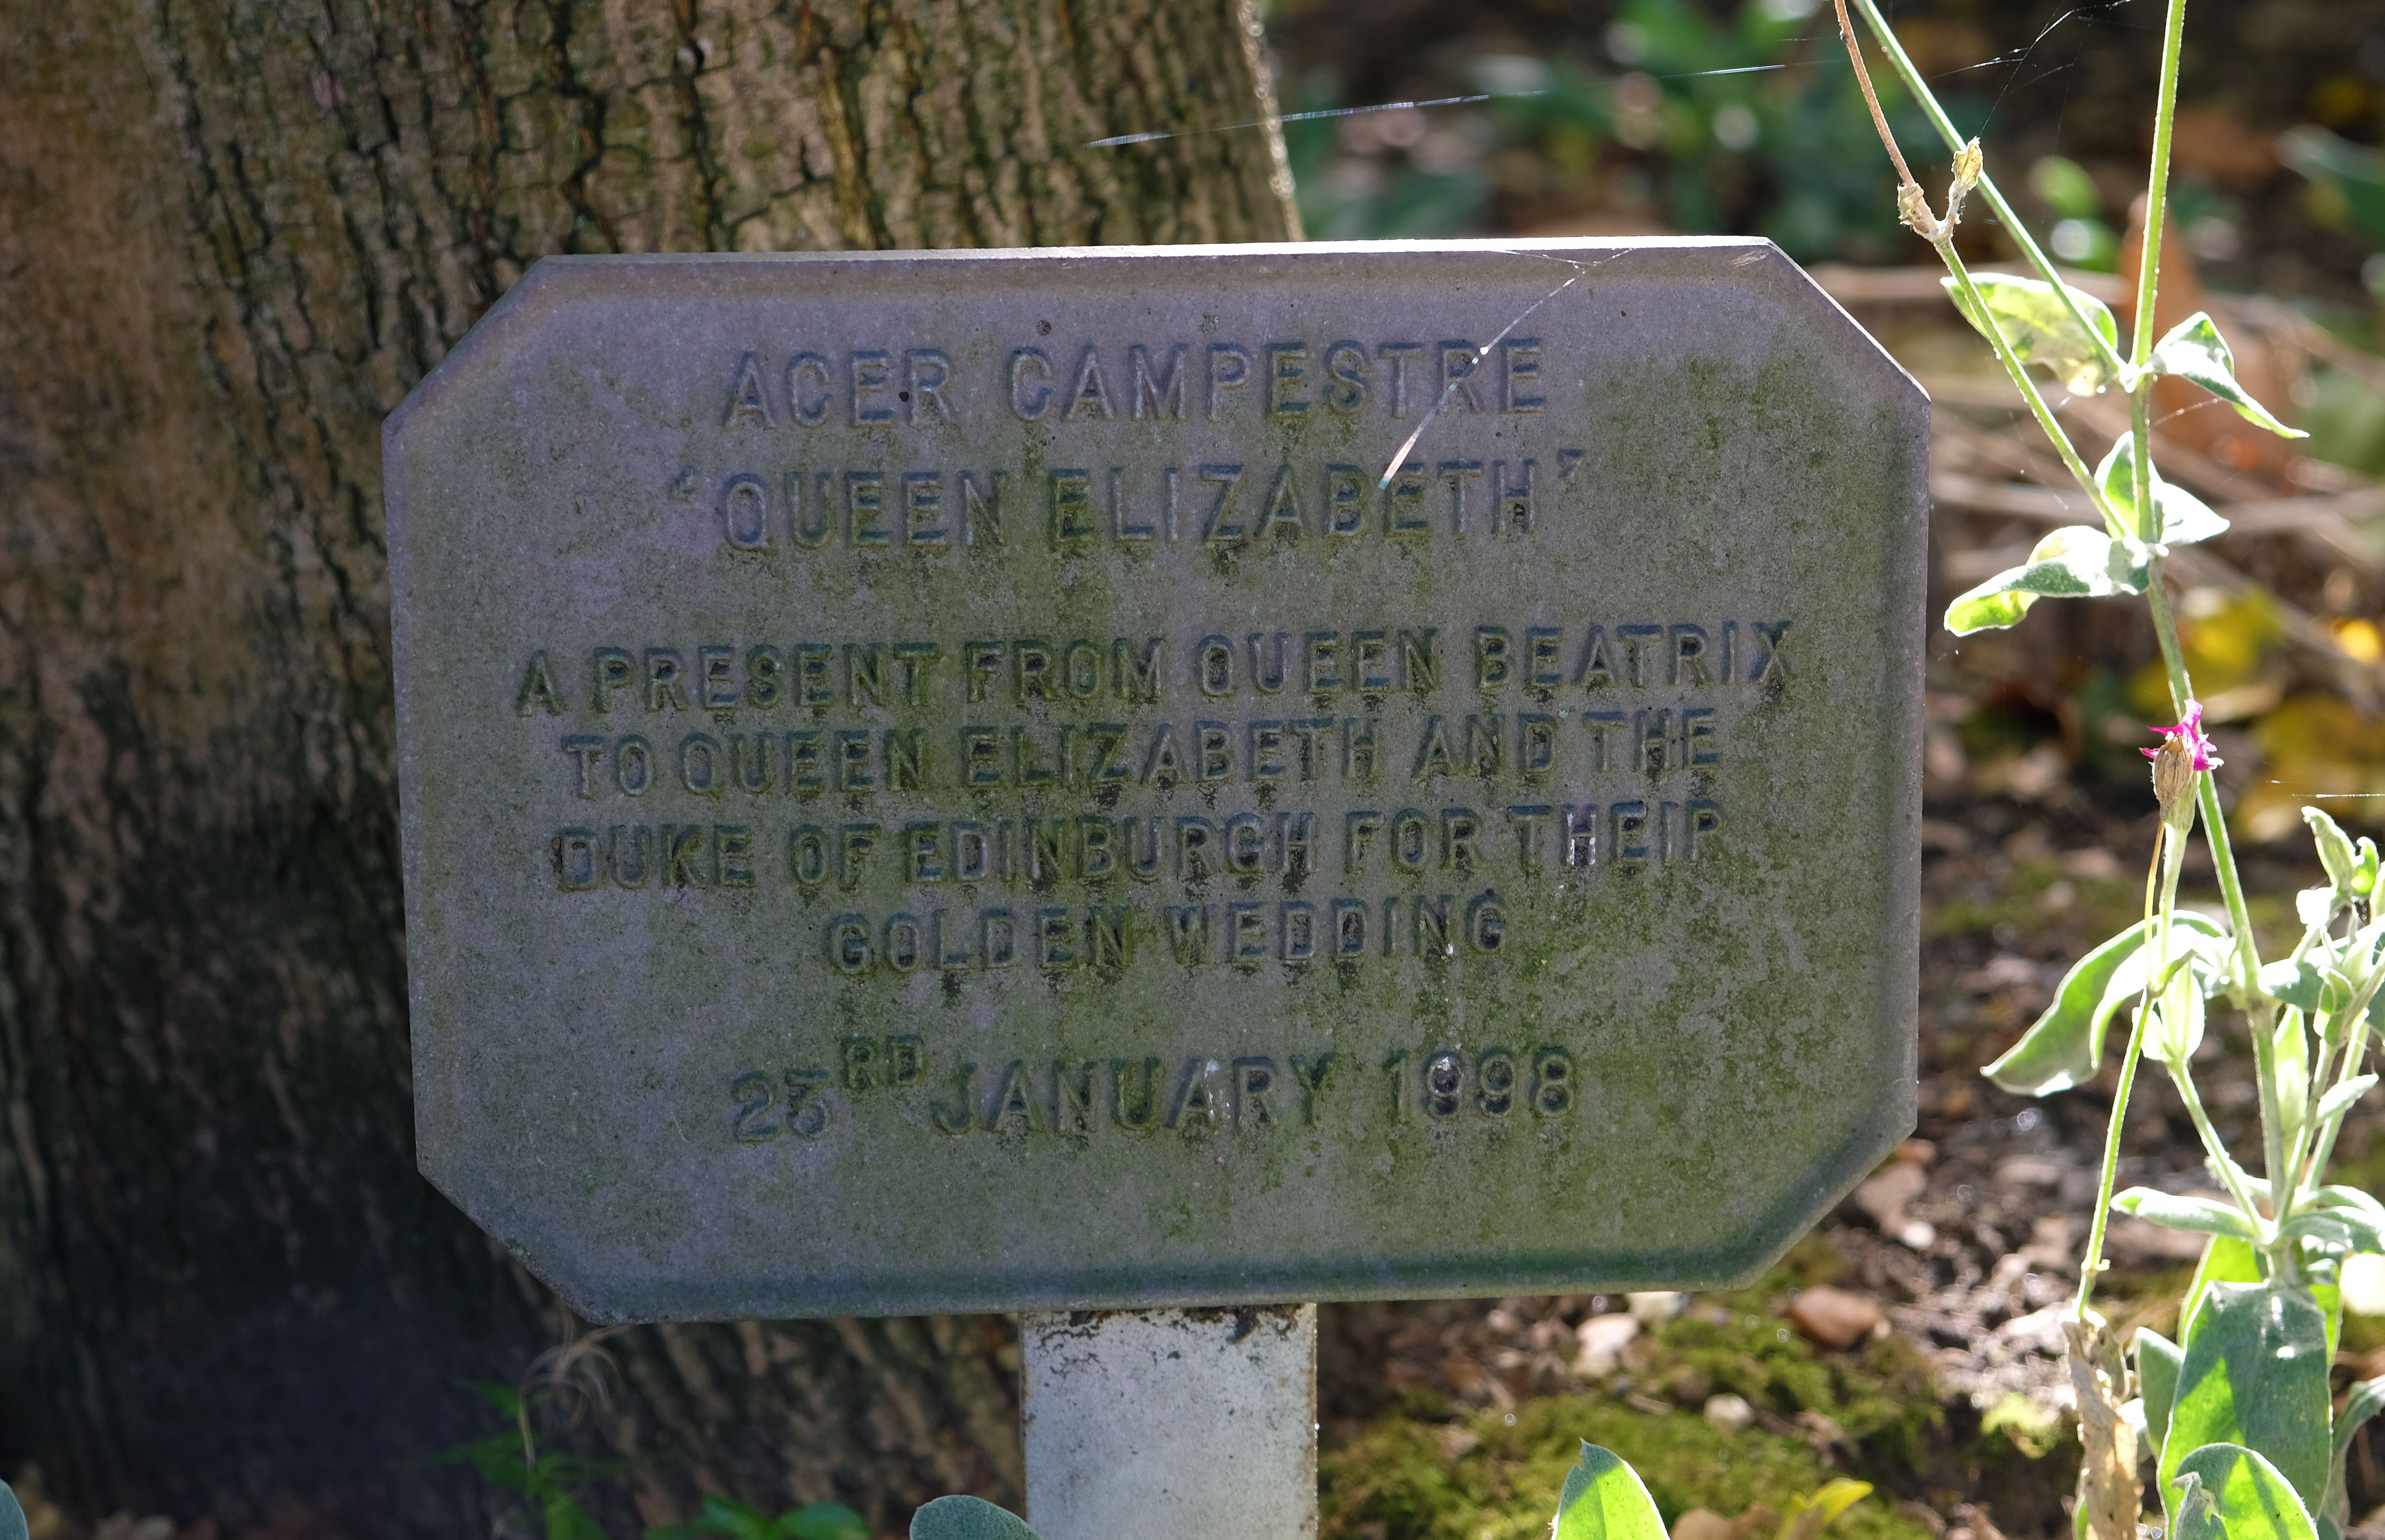 A plaque marking the tree given to The Queen and The Duke of Edinburgh's Golden Wedding Anniversary